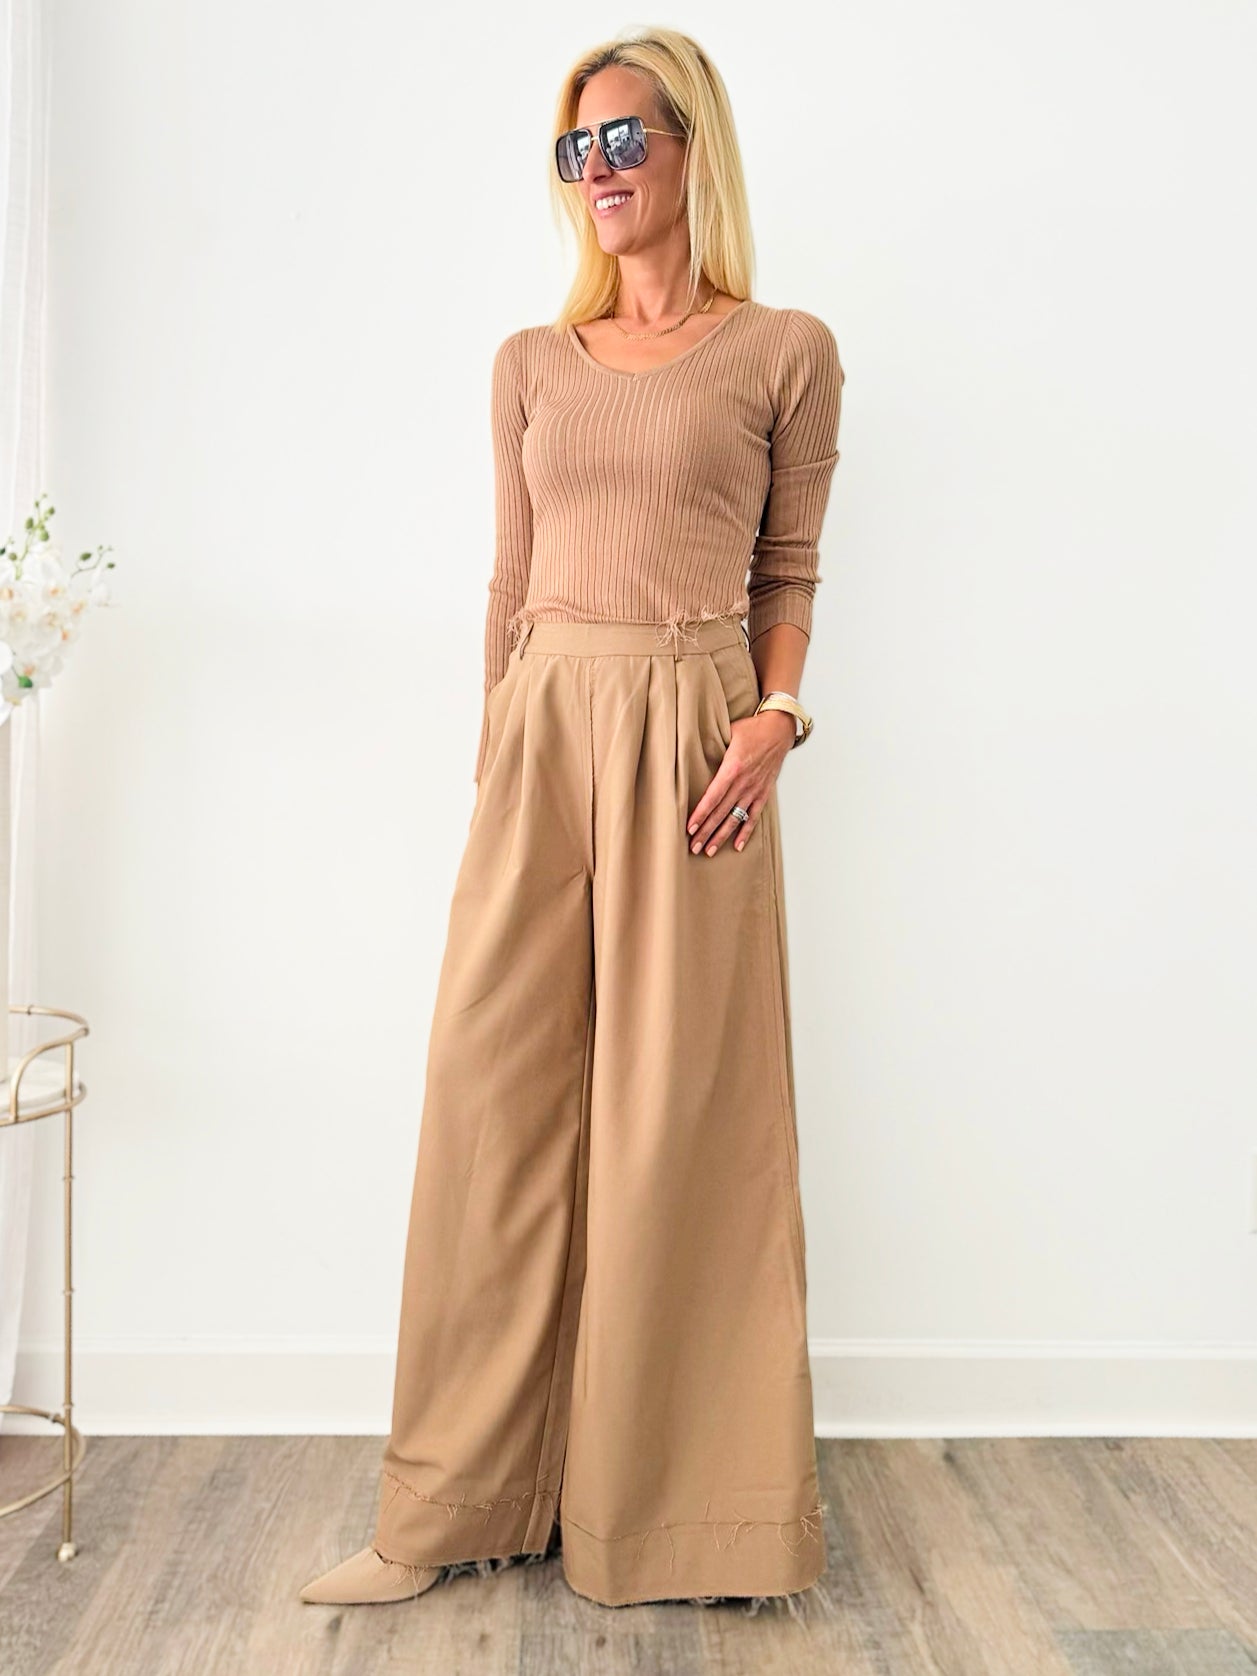 Long Sleeve Body Suit - Light Camel-130 Long Sleeve Tops-Venti6 Outlet-Coastal Bloom Boutique, find the trendiest versions of the popular styles and looks Located in Indialantic, FL